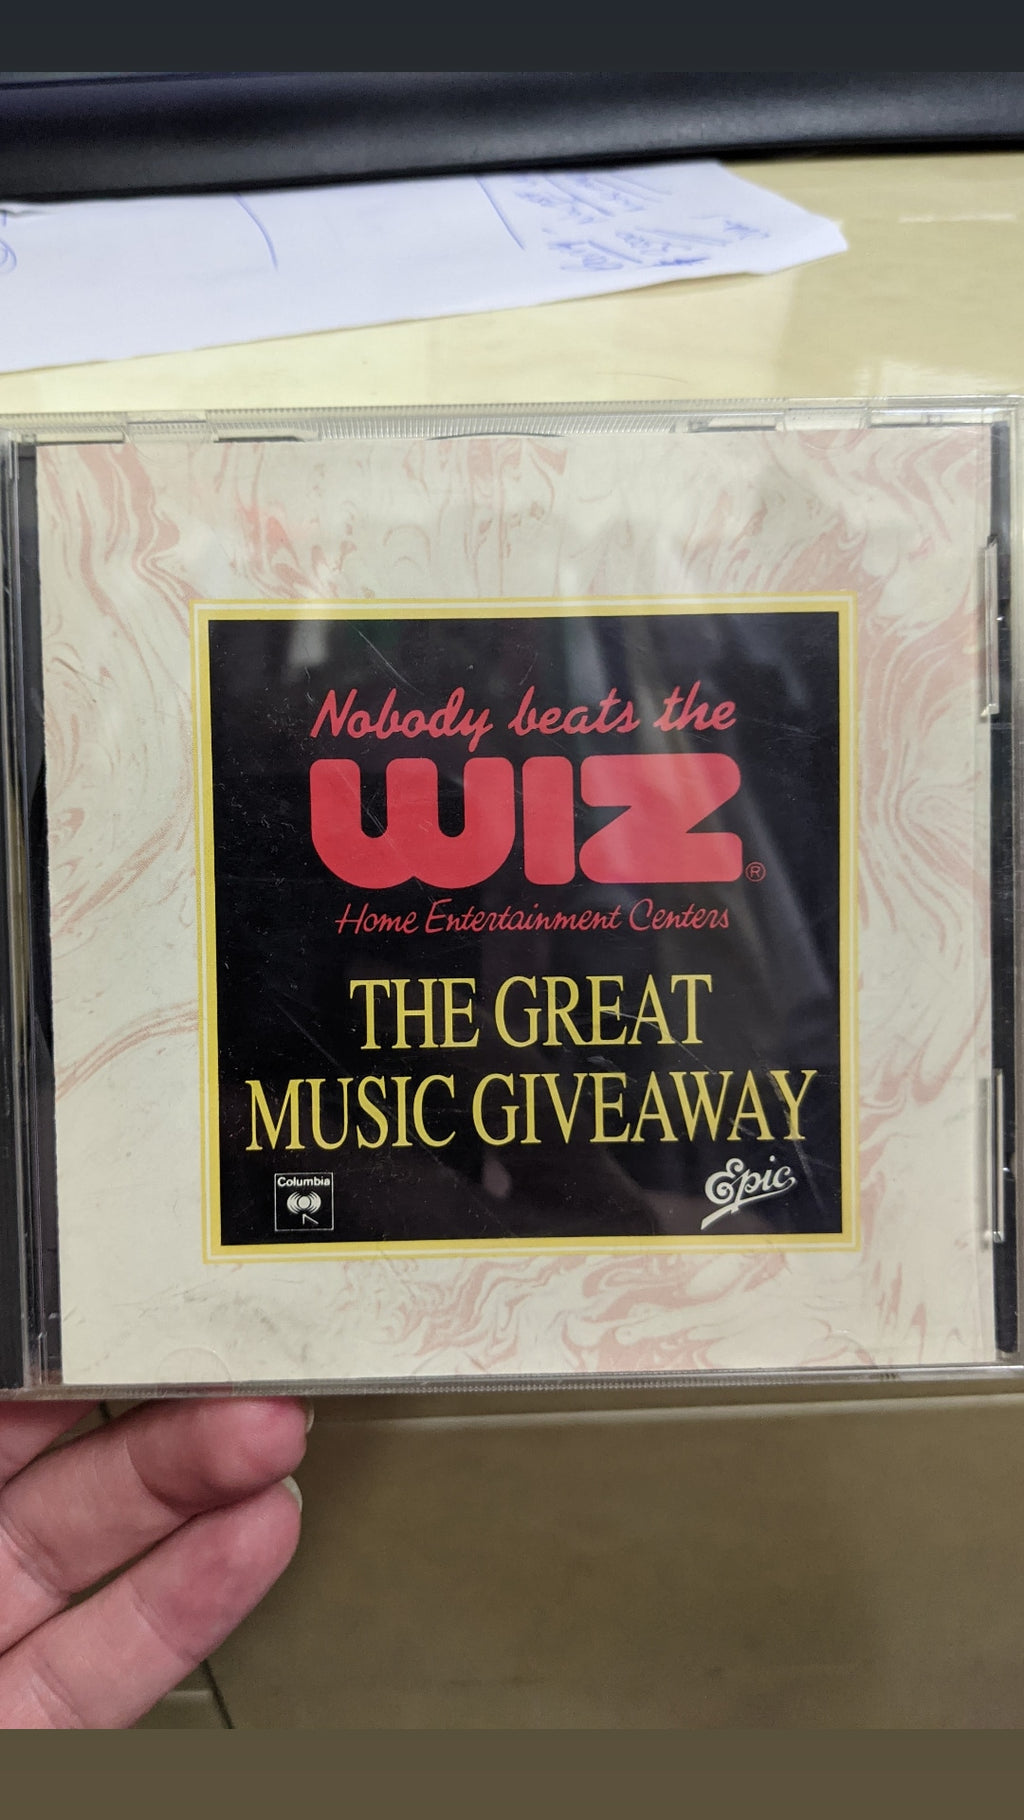 Nobody Beats The Wiz Great Music Giveaway PROMO CD 12 Tracks (1990)